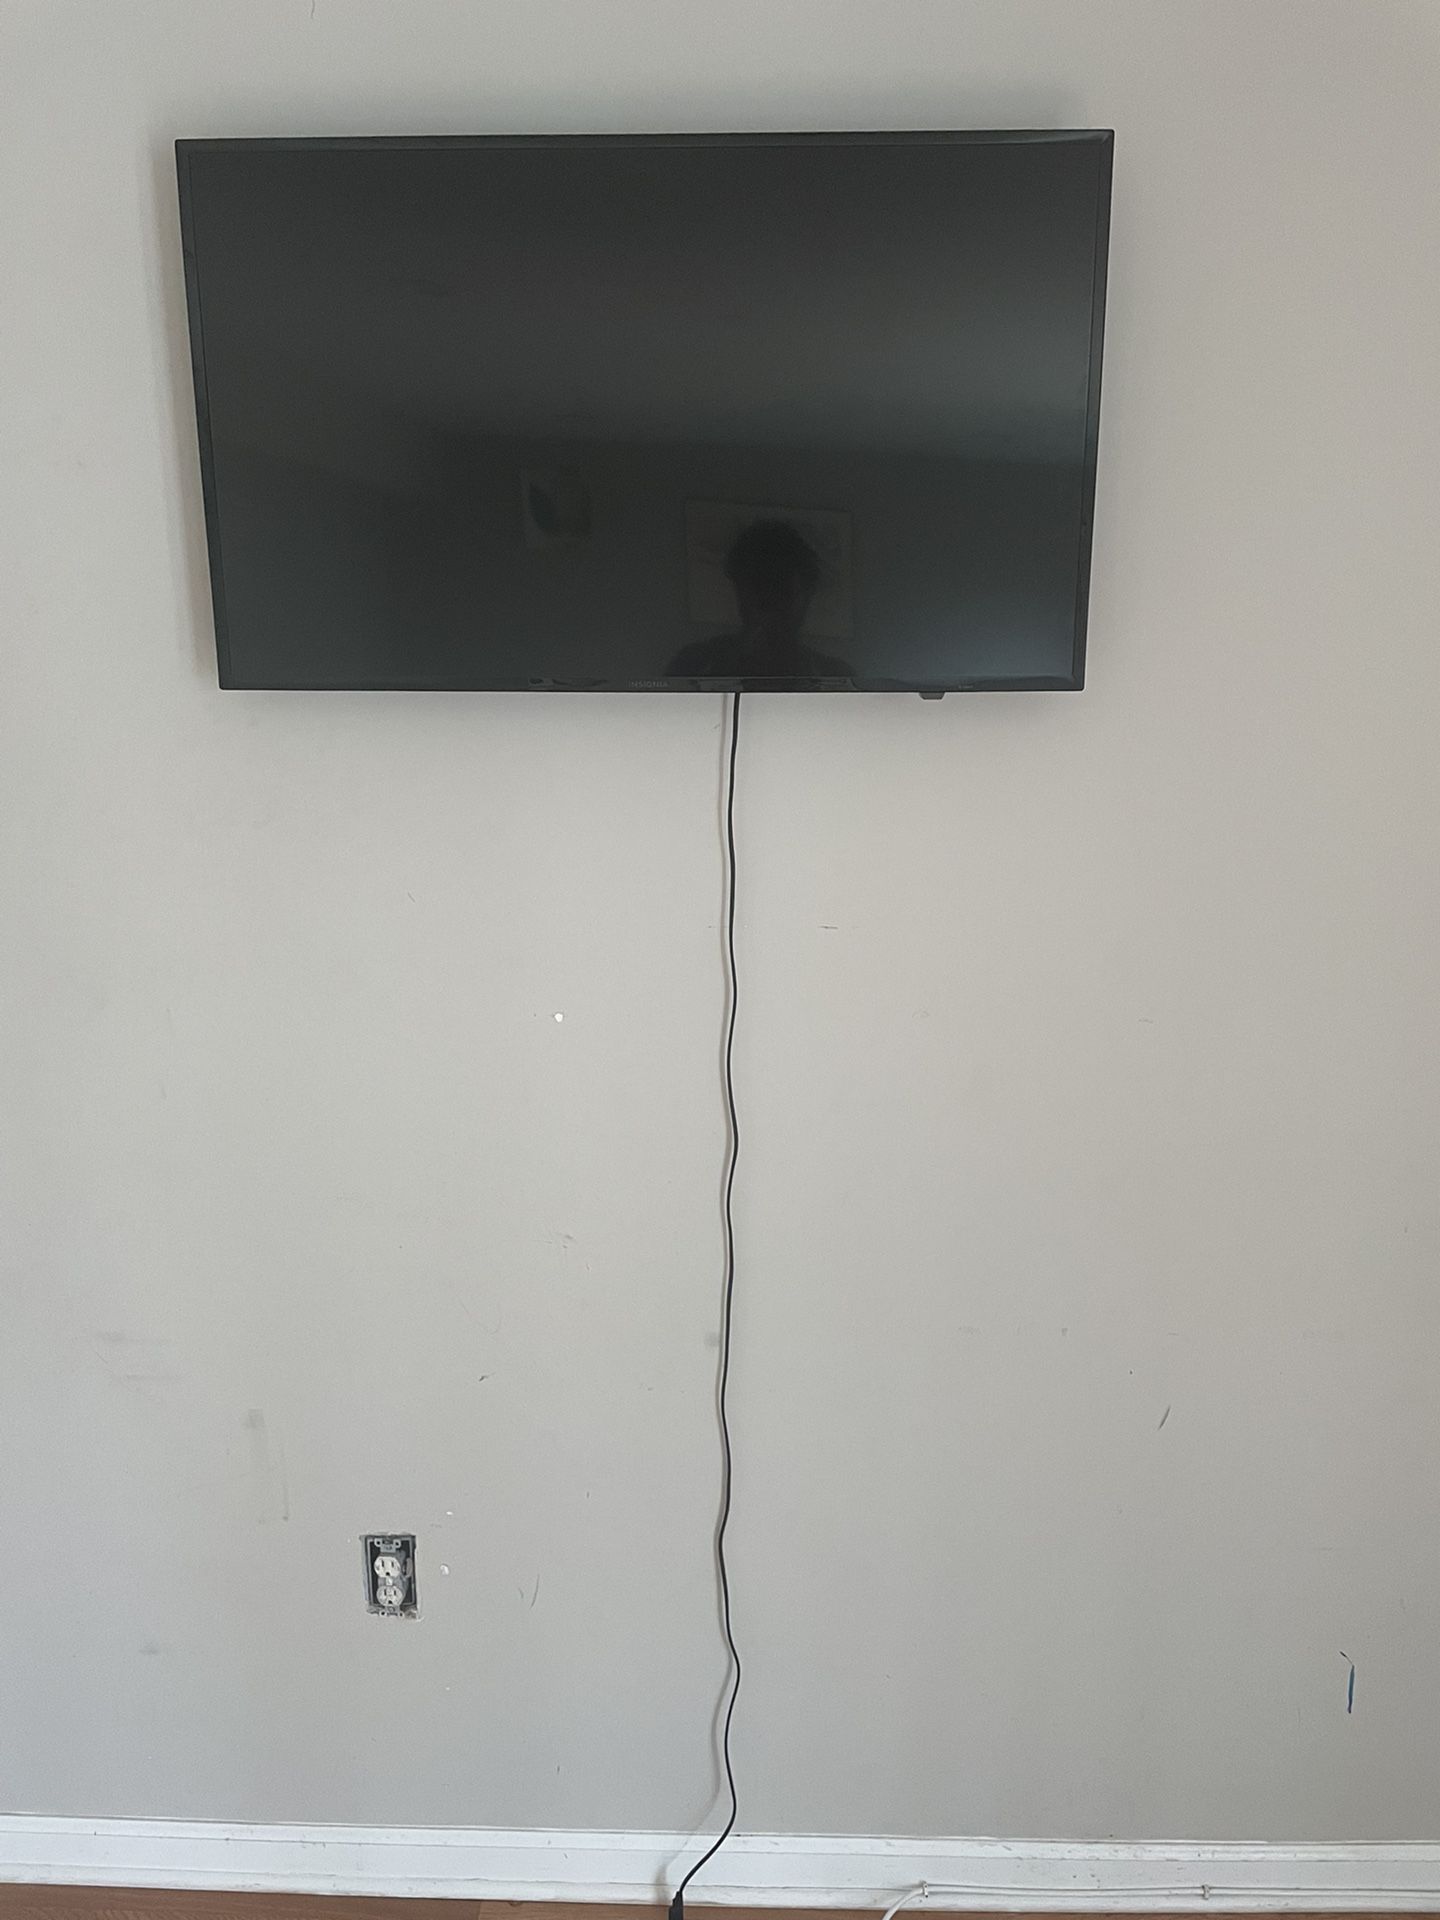 32 Inch Insignia Television With Remote